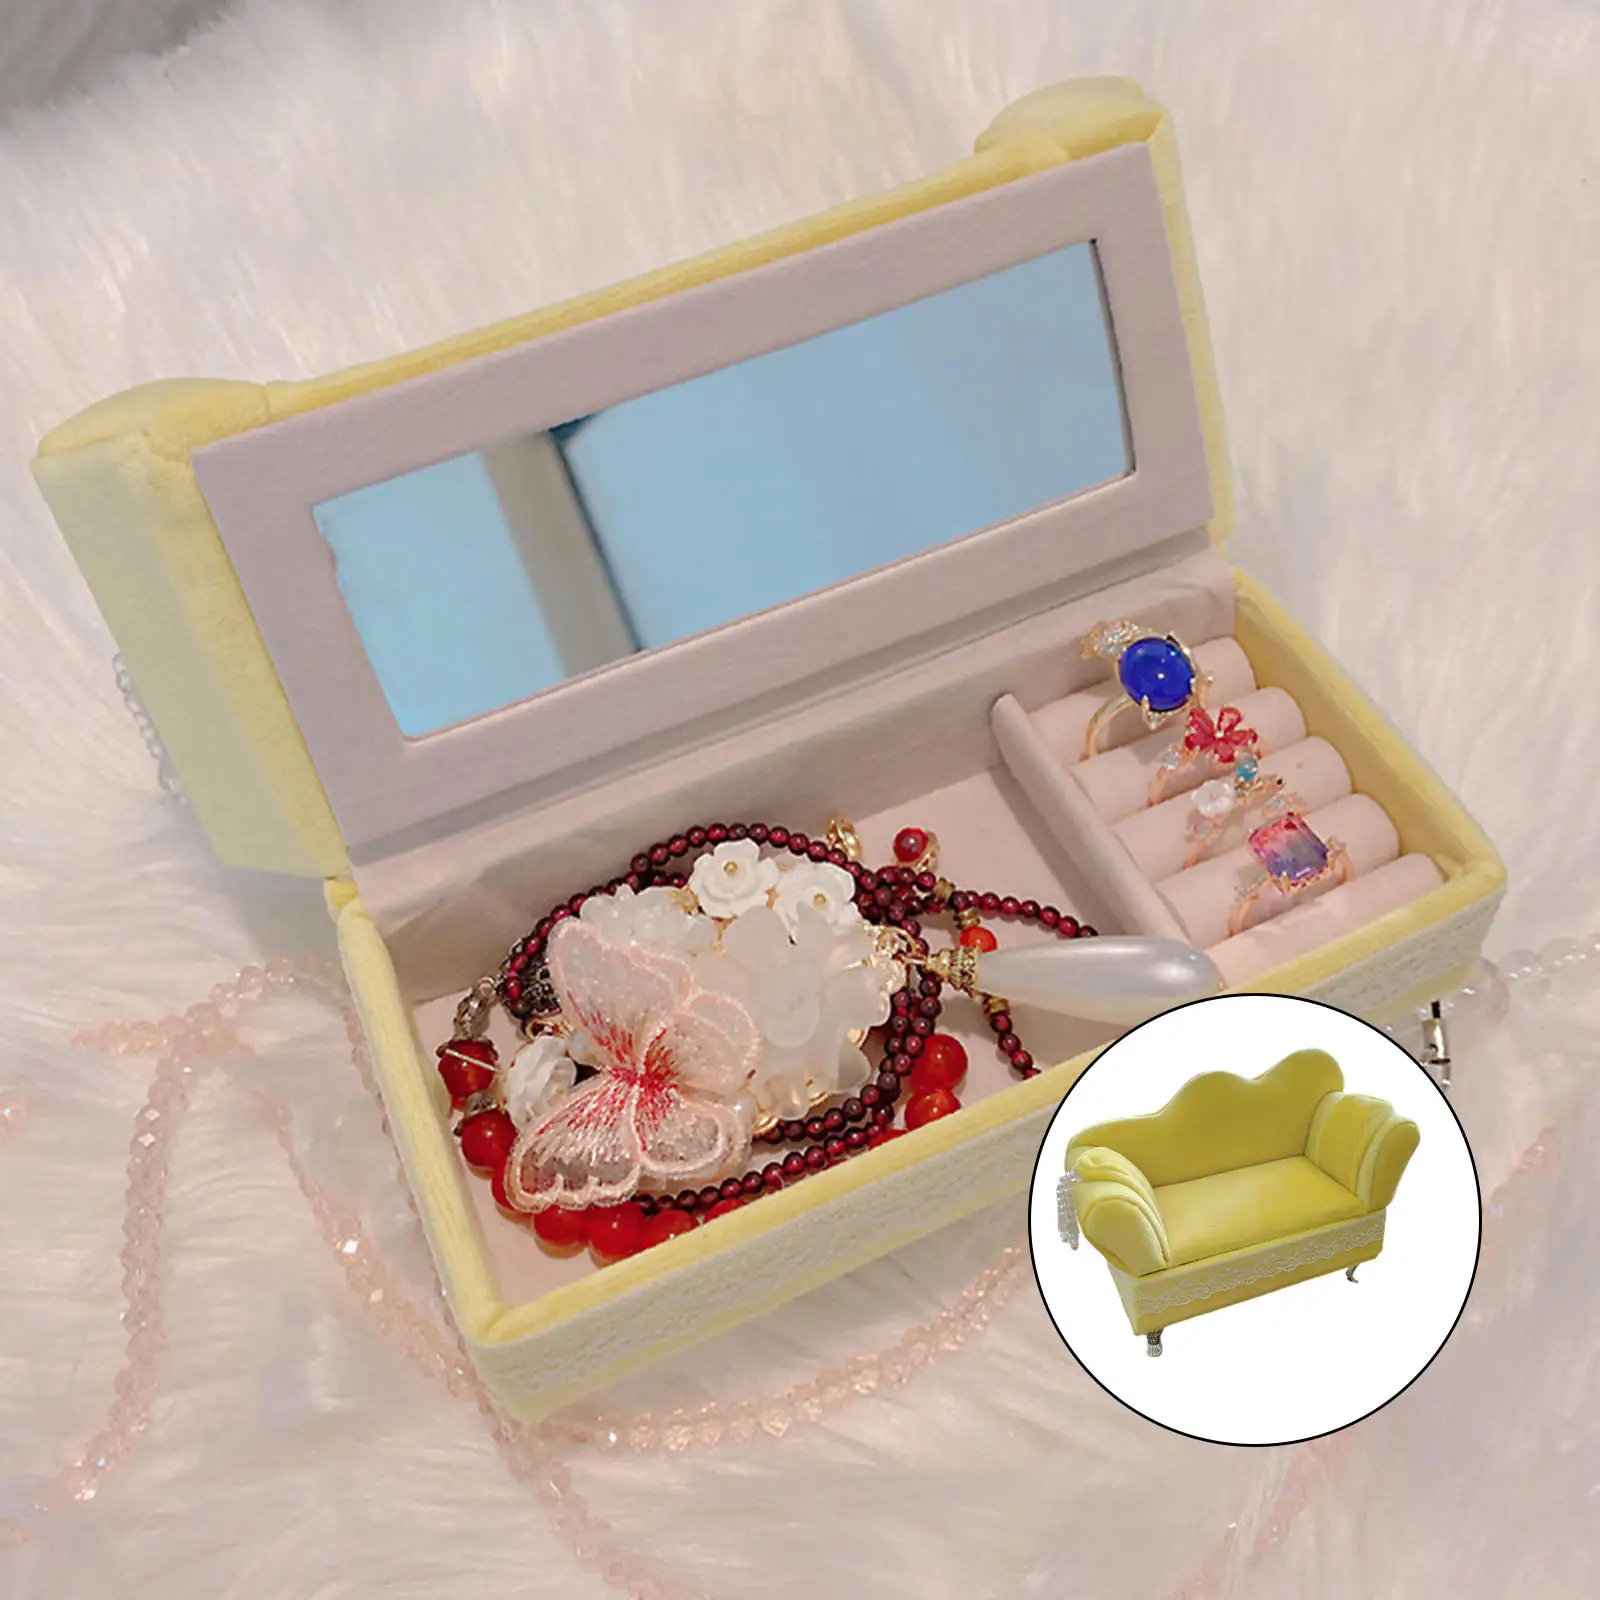 European Style Jewelry Box Display Portable Storage Case Great Gifts for Rings Earrings Girls Women Bedroom Make-up Accessories